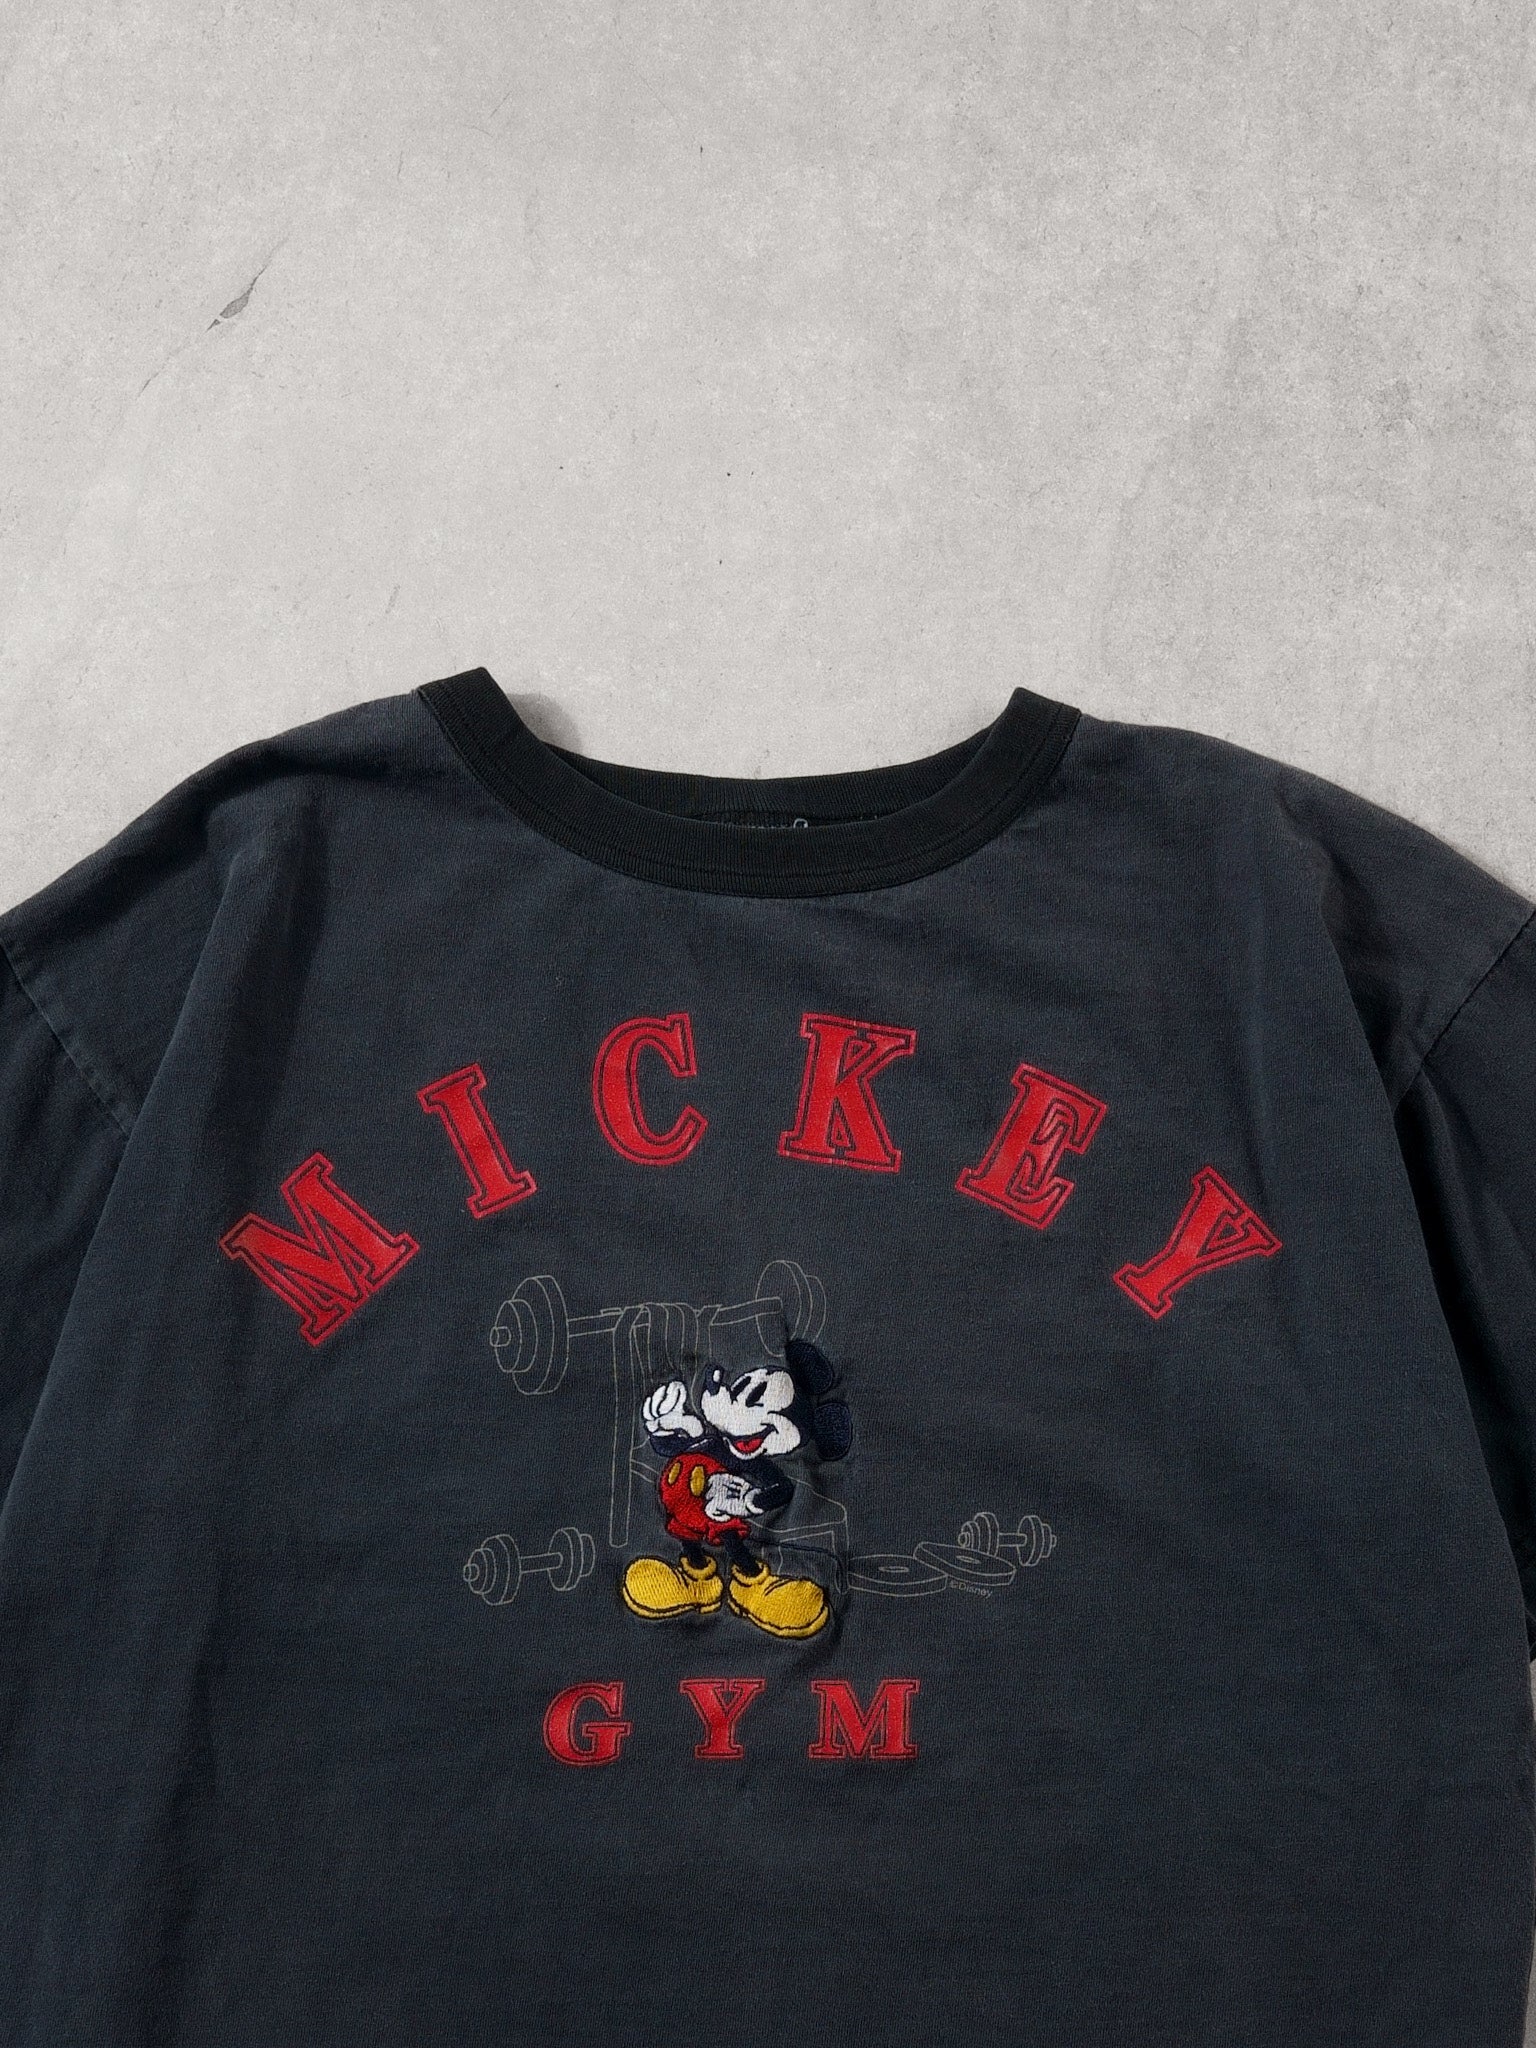 Vintage 90s Dark Grey Mickey Mouse Gym Graphic Tee (M)